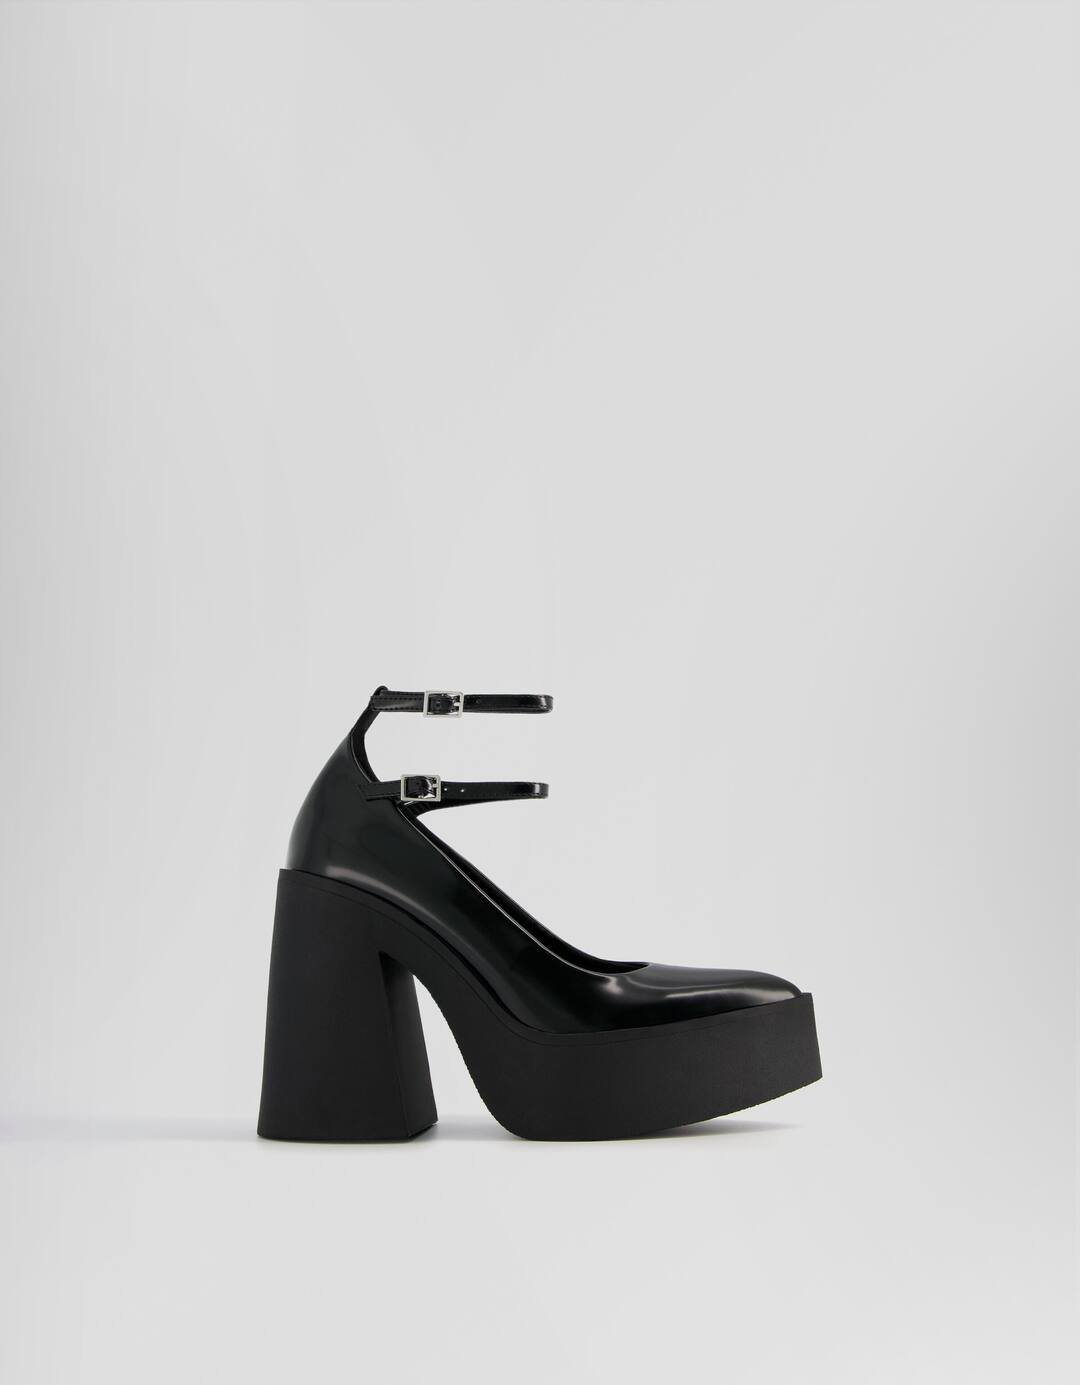 High-heel platform shoes with pointed toe and ankle strap